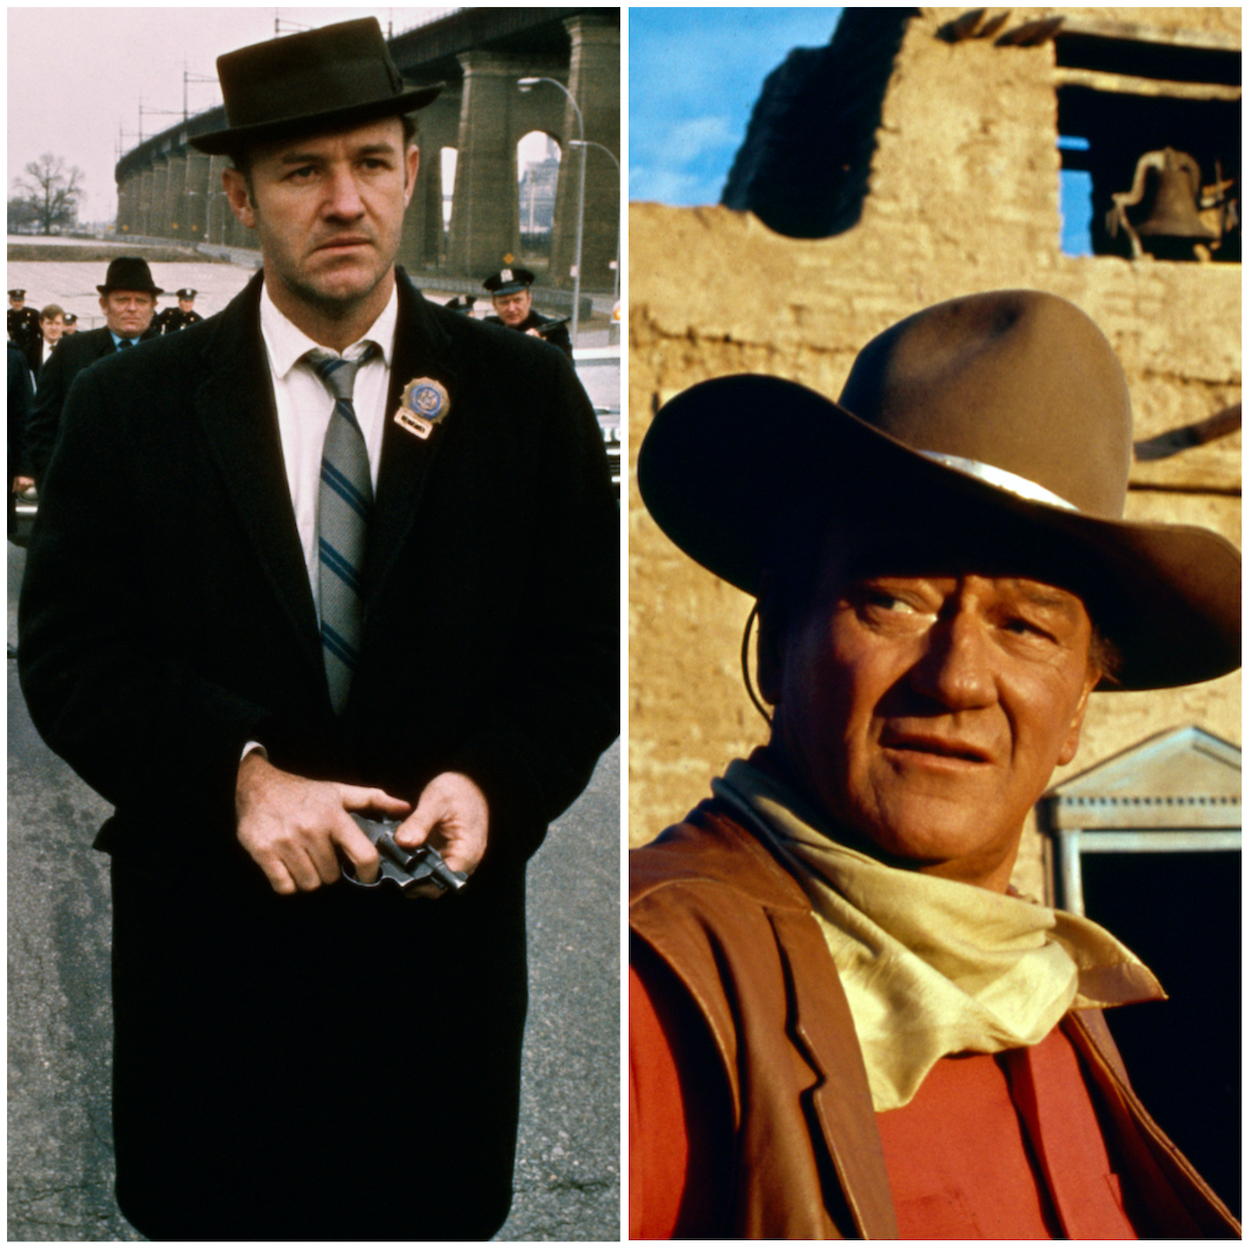 Gene Hackman stars as Popeye Doyle in 'The French Connection' (left); John Wayne as Cole Thorton in 'El Dorado.' Wayne once said he hated Hackman's acting, calling him "the worst actor in town."